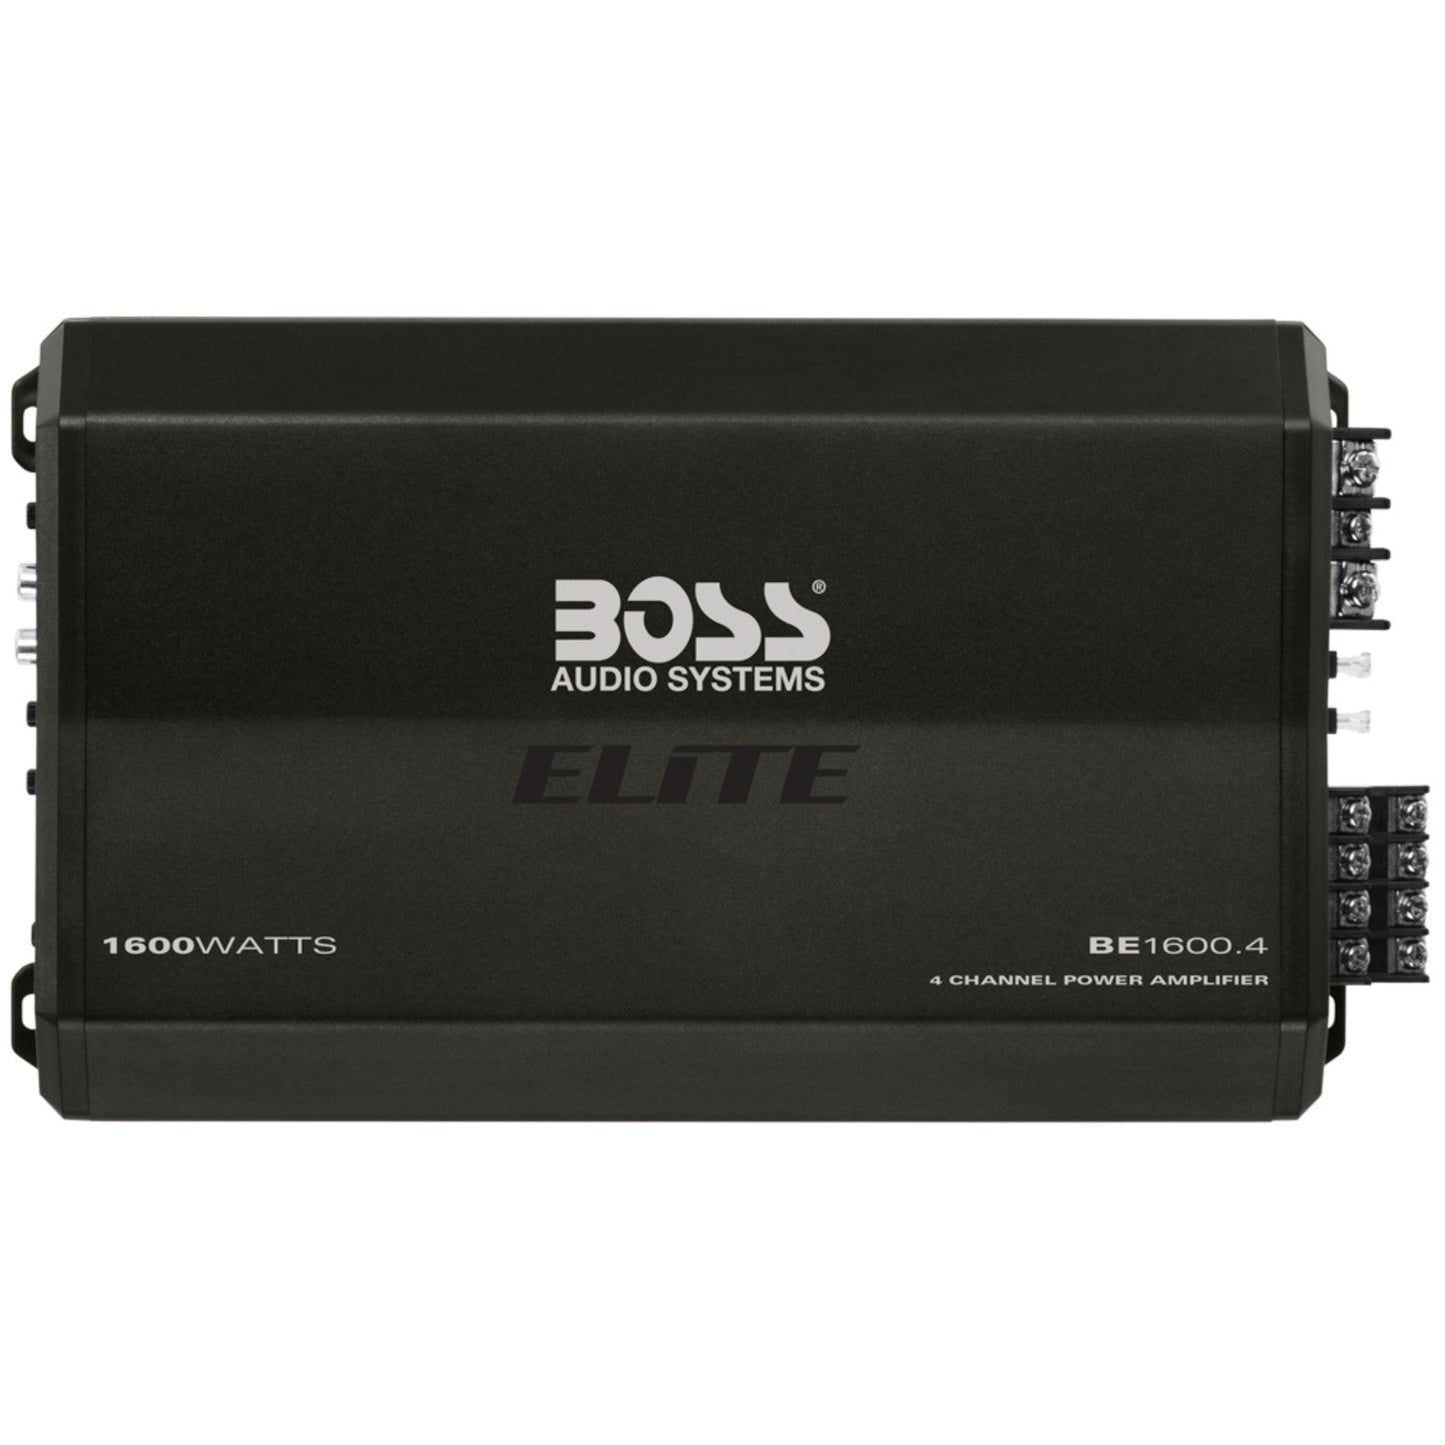 BOSS Audio Systems, Amplifiers > 4-Channel, Model BE1600.4, retail packaging view